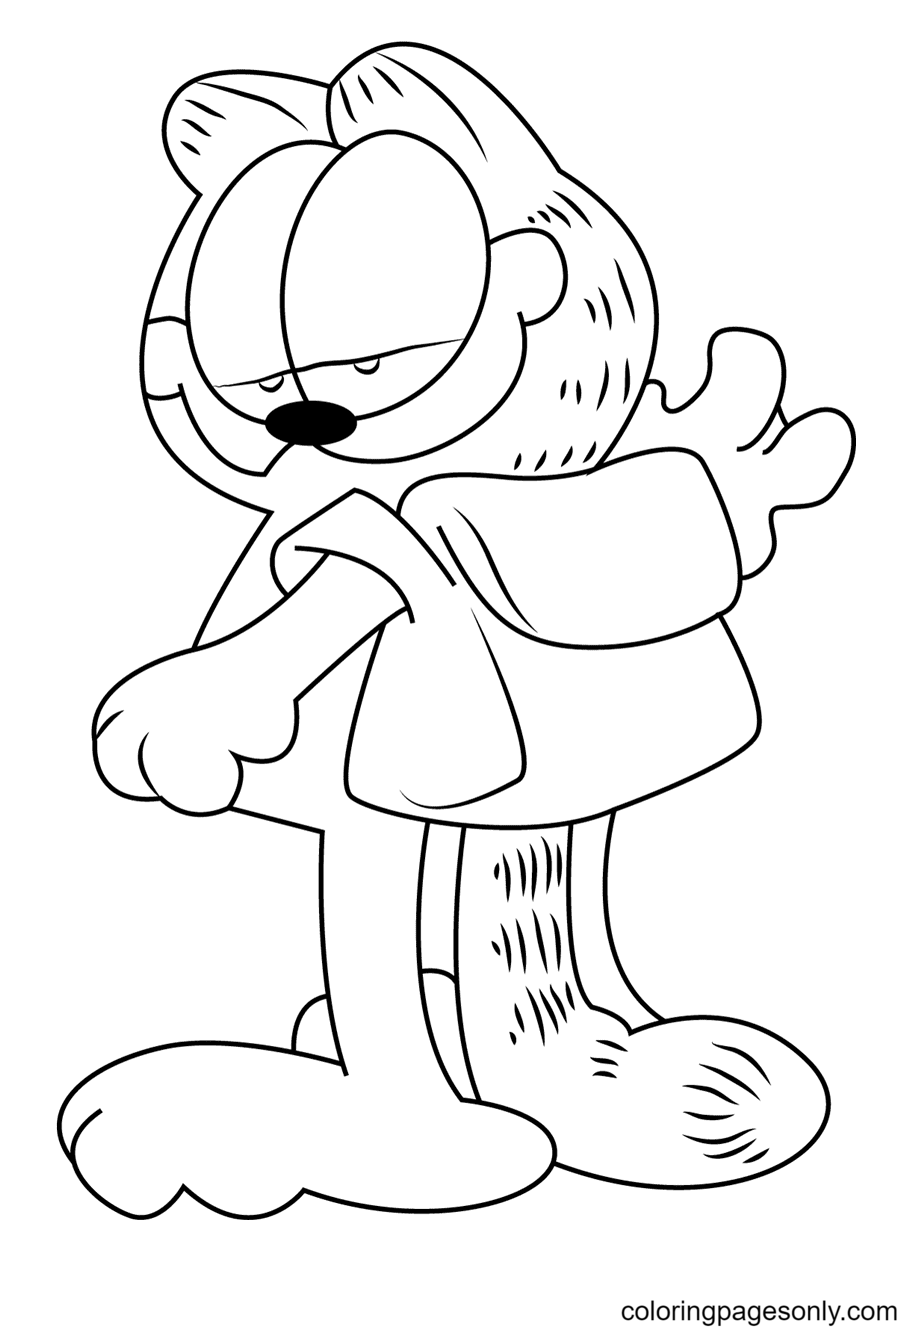 Garfield Looking You Coloring Pages